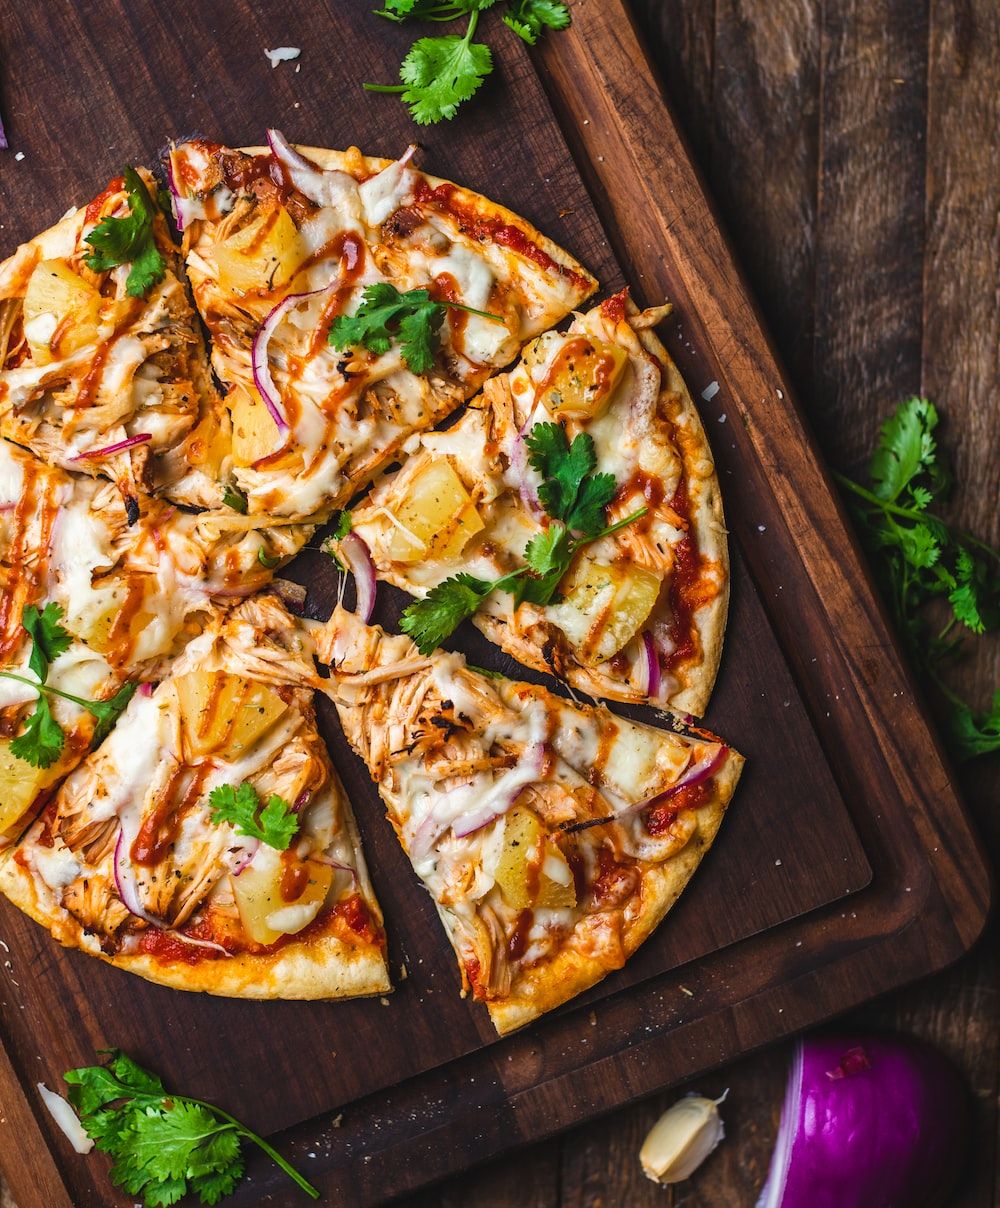 Pizza Slice Picture [HD]. Download Free Image